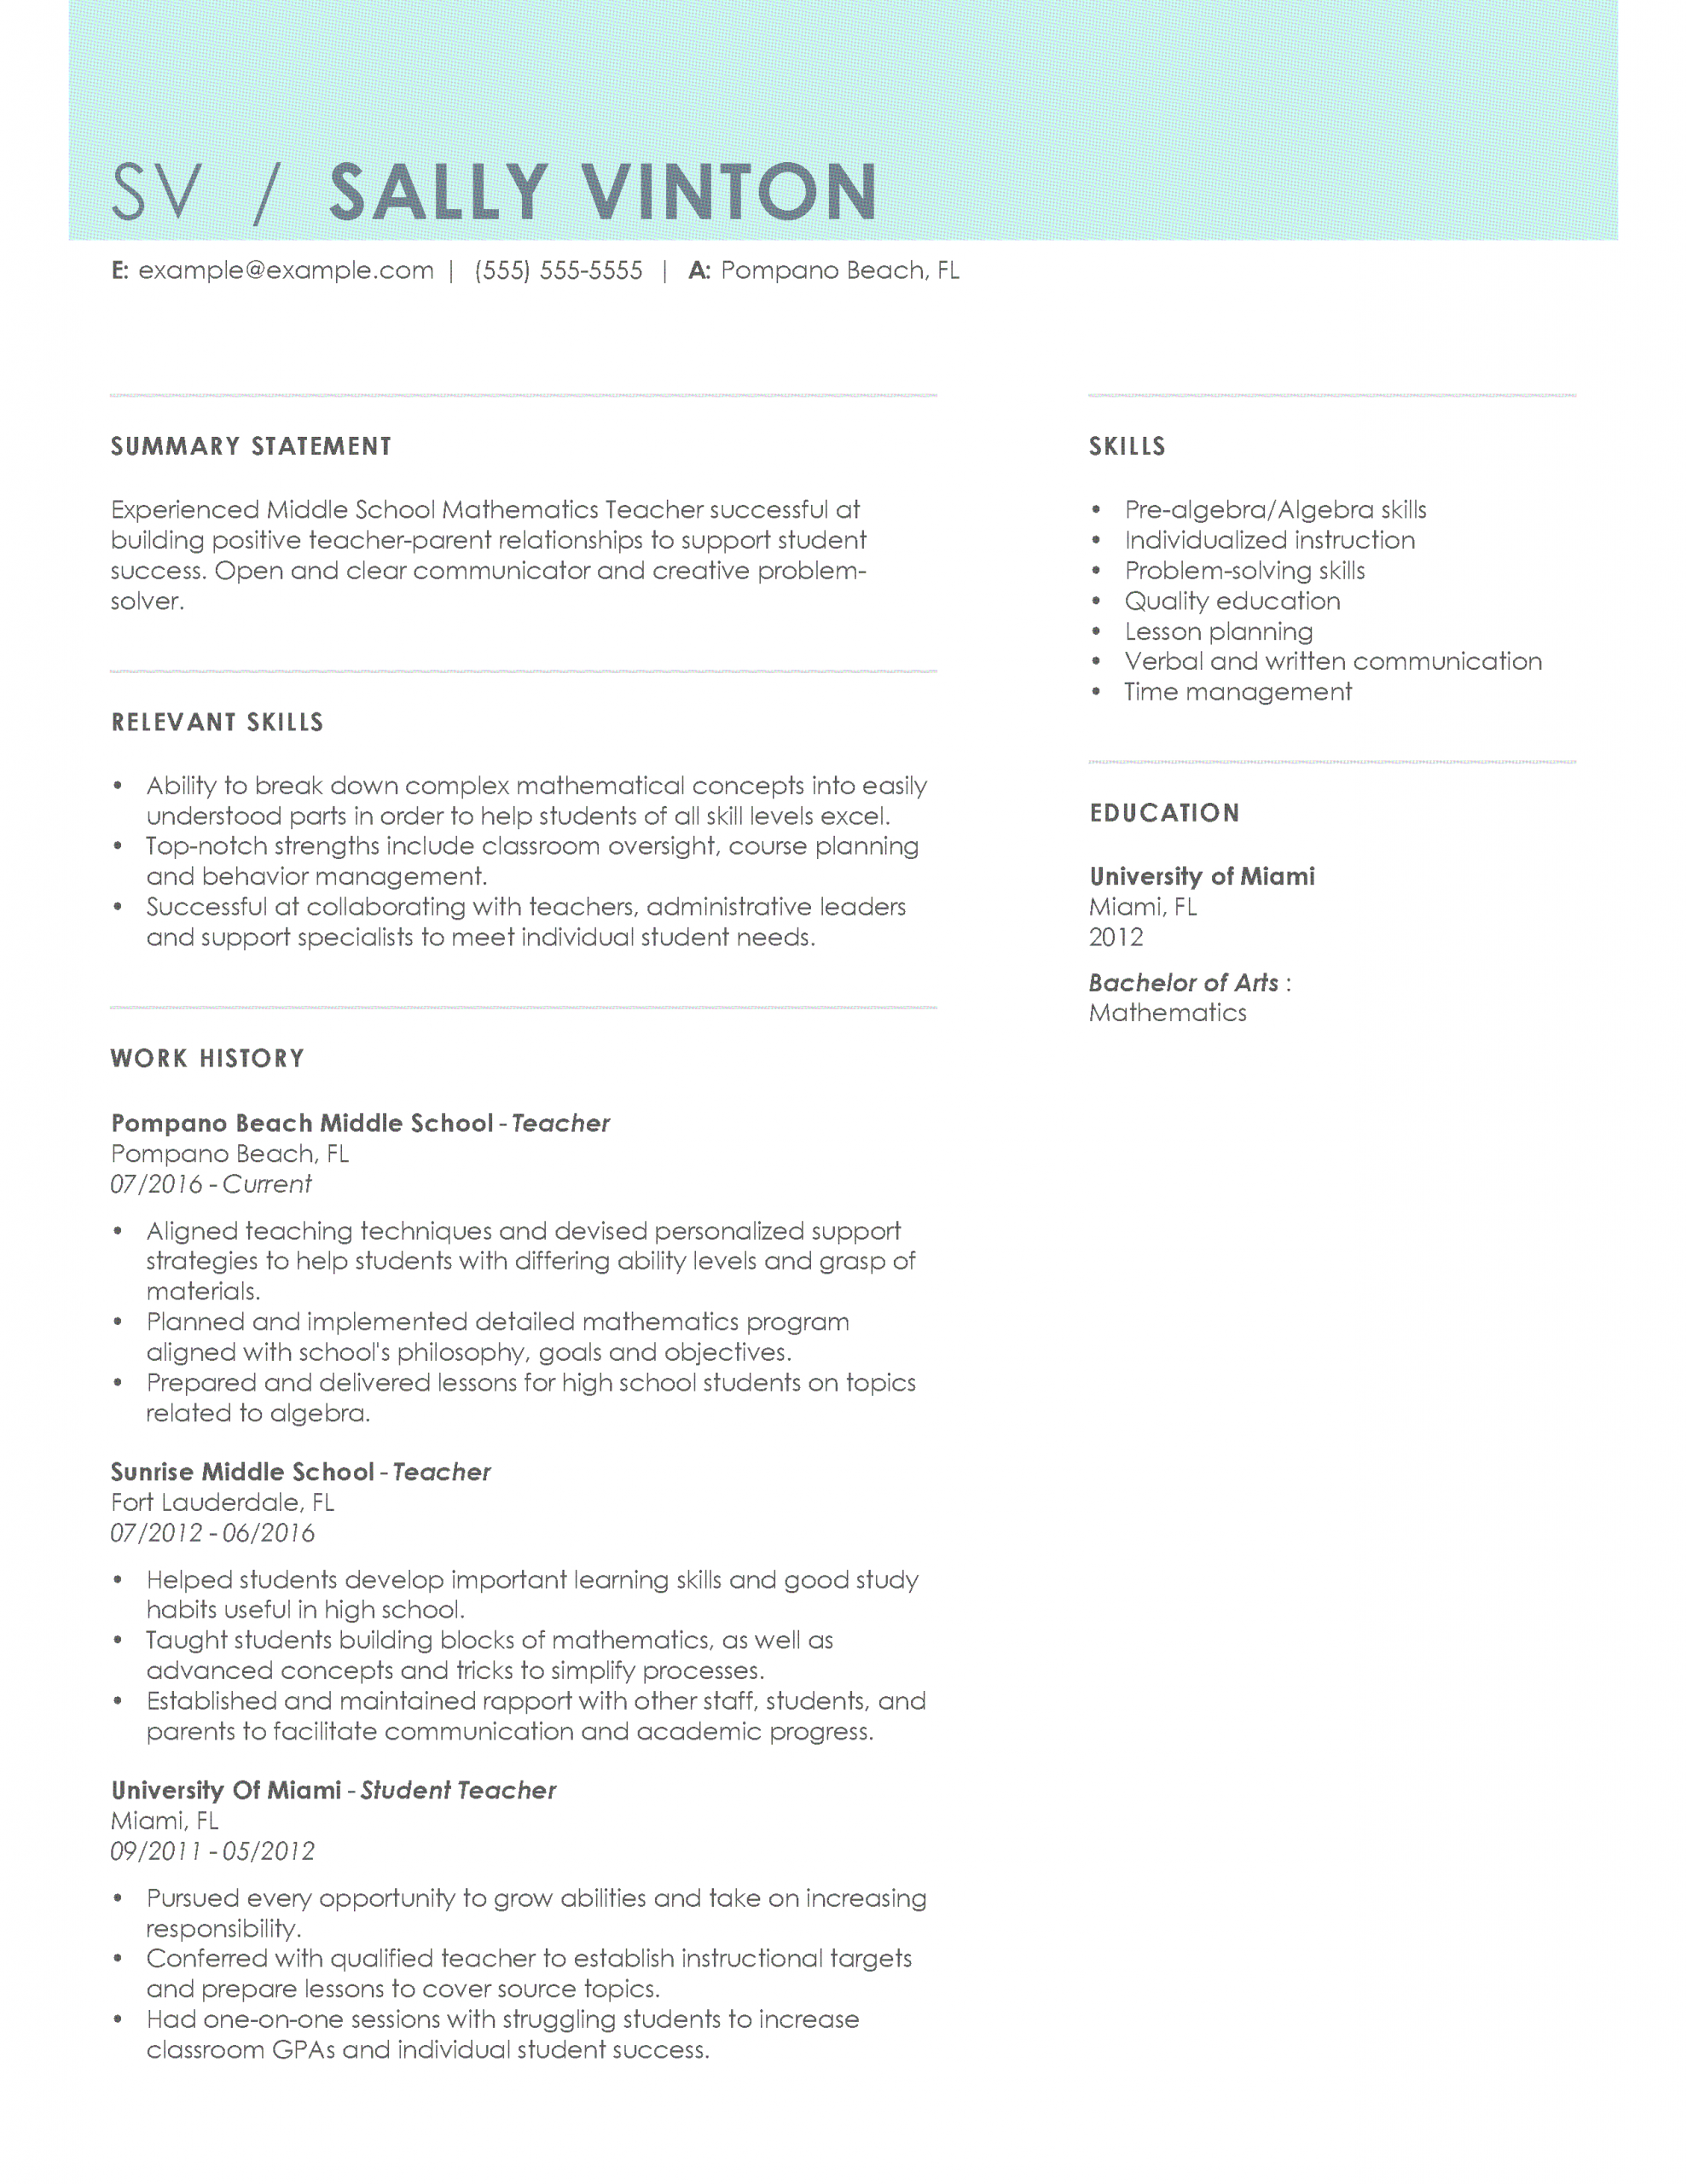 Easy To Customize Teacher Resume Examples For 2020 throughout sizing 2550 X 3300